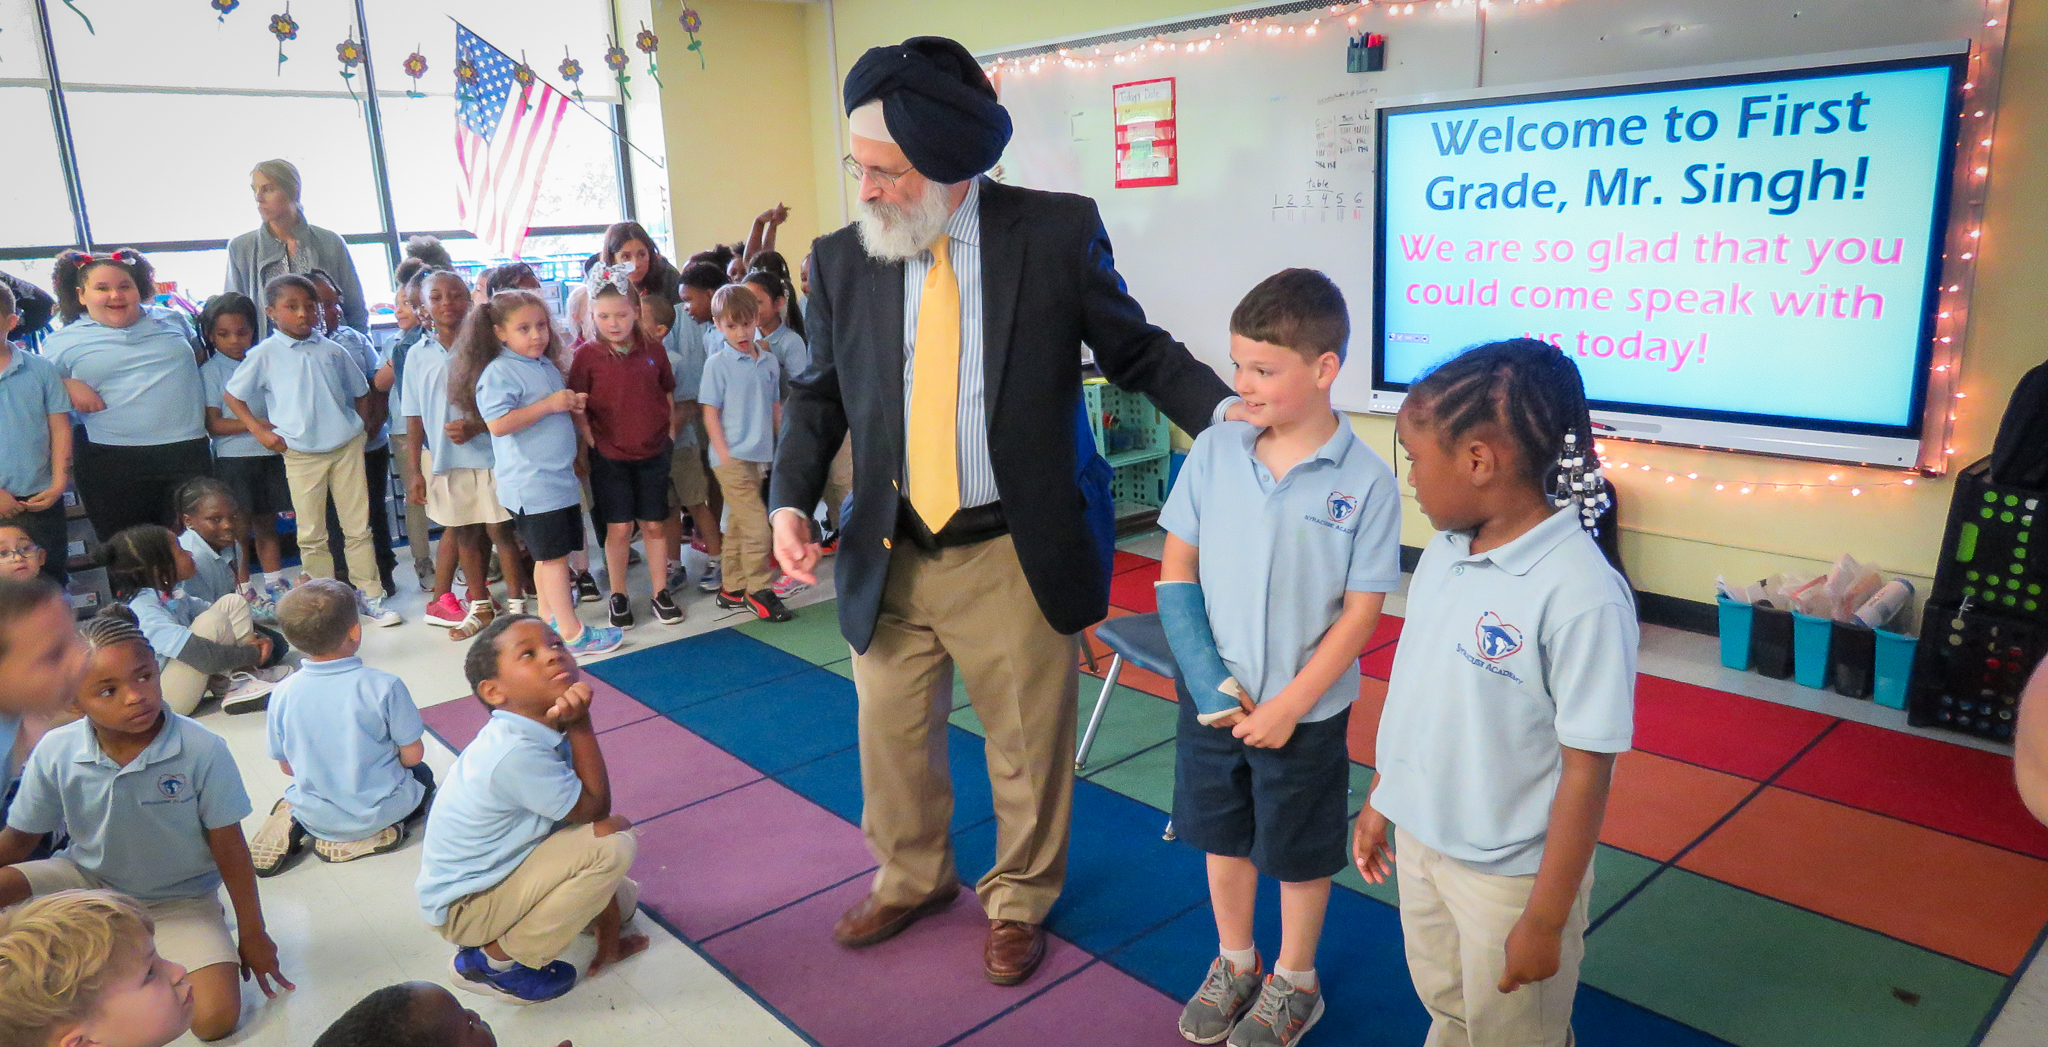 Founder and chair of Wisdom Thinkers, Ralph Singh, spoke with the first grade Atoms about creating a climate that nurtures character